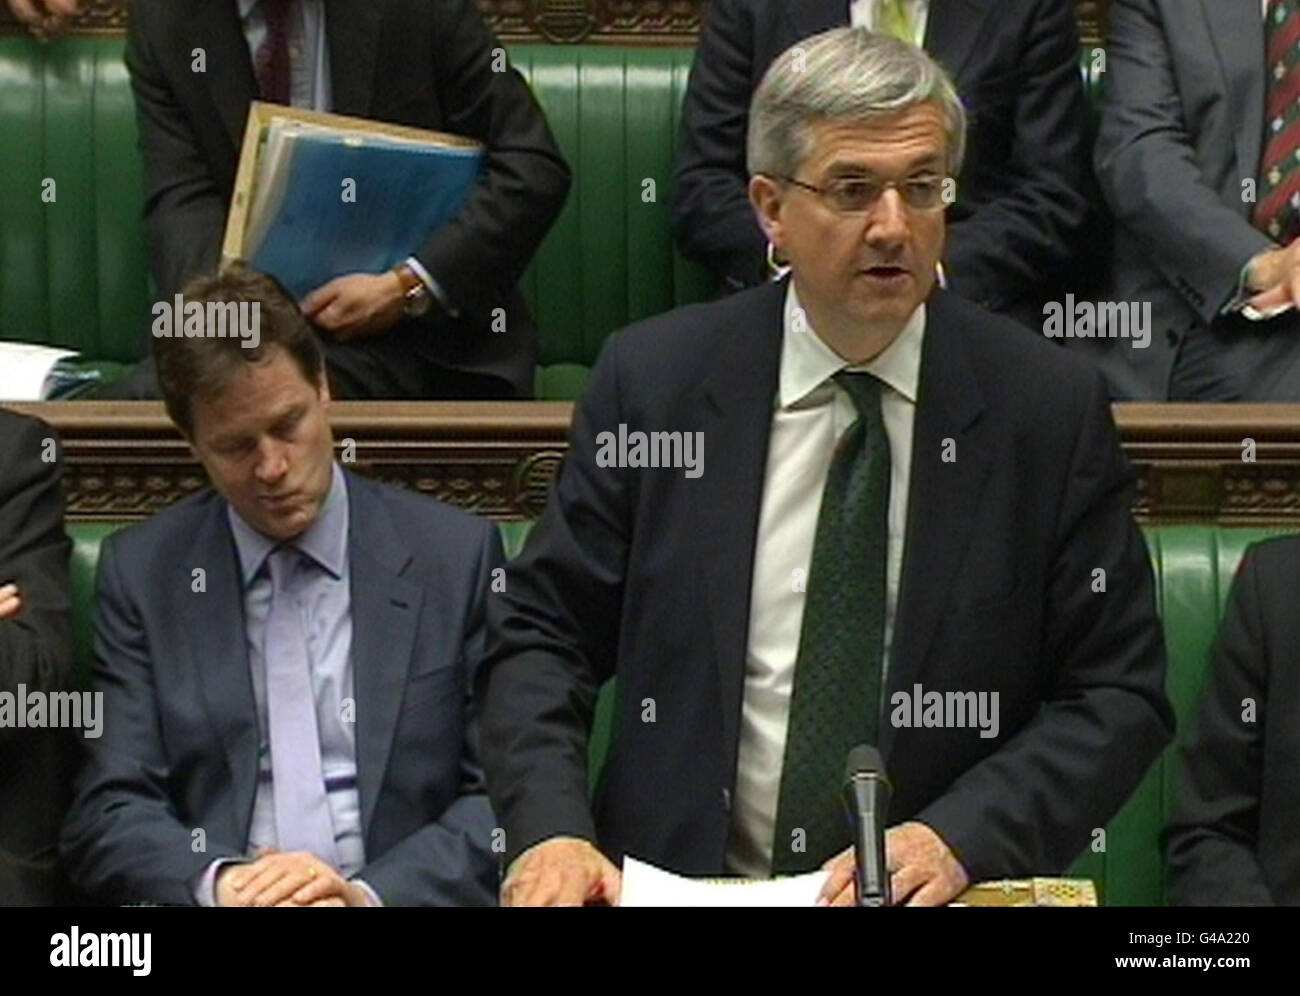 Energy Secretary Chris Huhne speaks in the House of Commons, London, where he announced that the Government will sign up to an 'ambitious' target for the fourth carbon budget that will commit the UK to a 50% cut in emissions on 1990 levels by 2025. Stock Photo